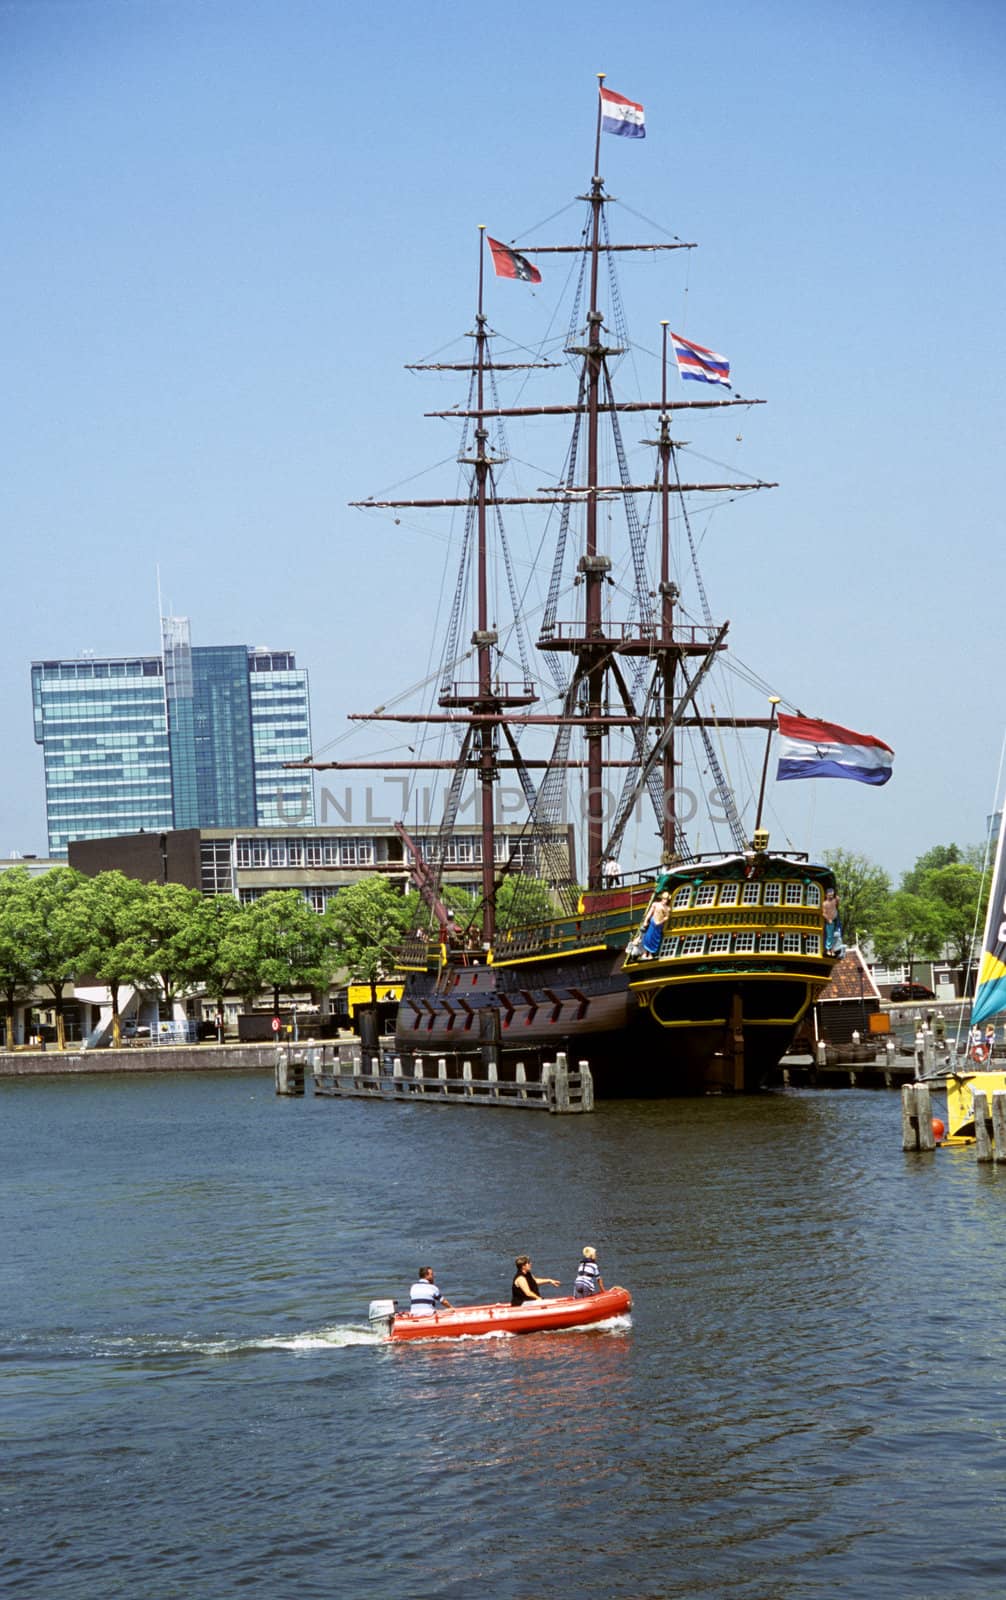 A recreation of a traditional 17th century sailing ship - 'The Amsterdam' on the Ij canal.